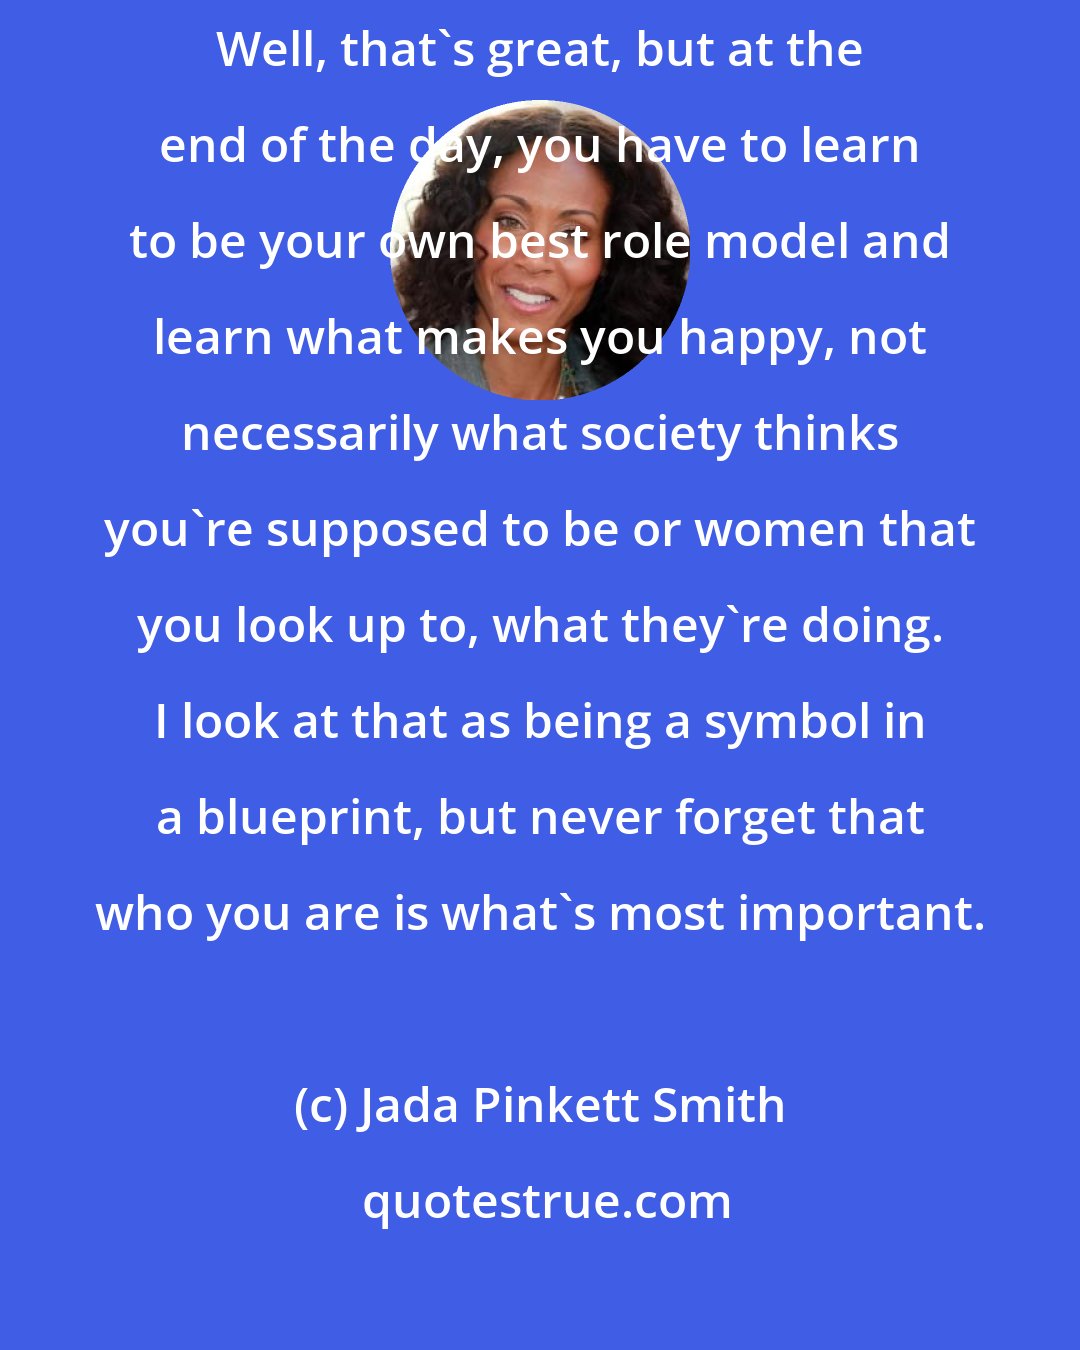 Jada Pinkett Smith: Many times people will say, you know, you're such a great role model. Well, that's great, but at the end of the day, you have to learn to be your own best role model and learn what makes you happy, not necessarily what society thinks you're supposed to be or women that you look up to, what they're doing. I look at that as being a symbol in a blueprint, but never forget that who you are is what's most important.